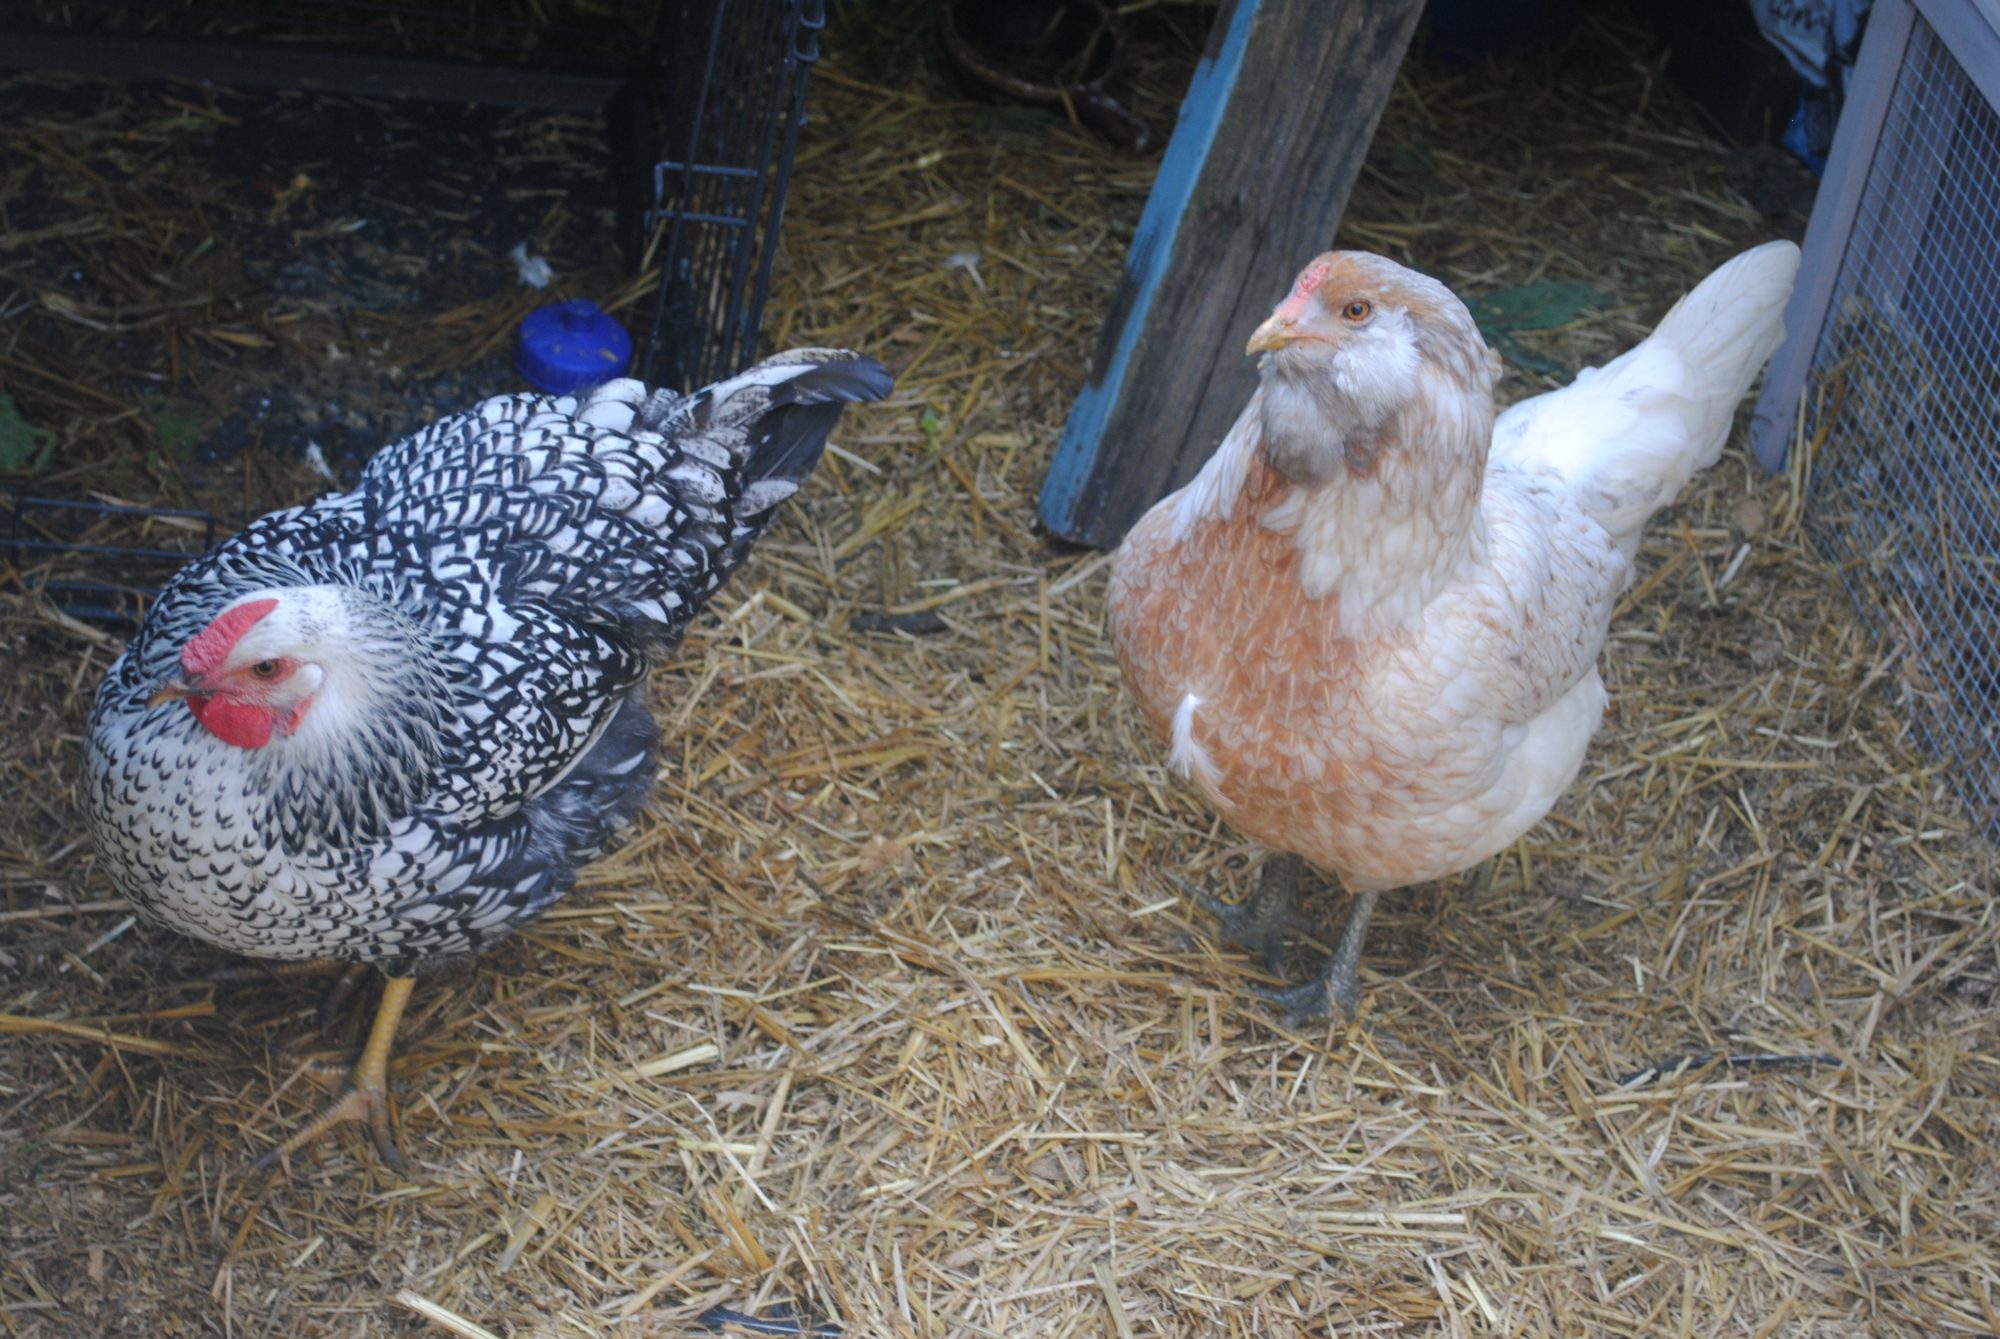 My Silver-Laced Wyandotte, Lacy-Nicole (left) and Big Mamma the Easter Egger (right). Is it just me or does Big Mamma look predatory?